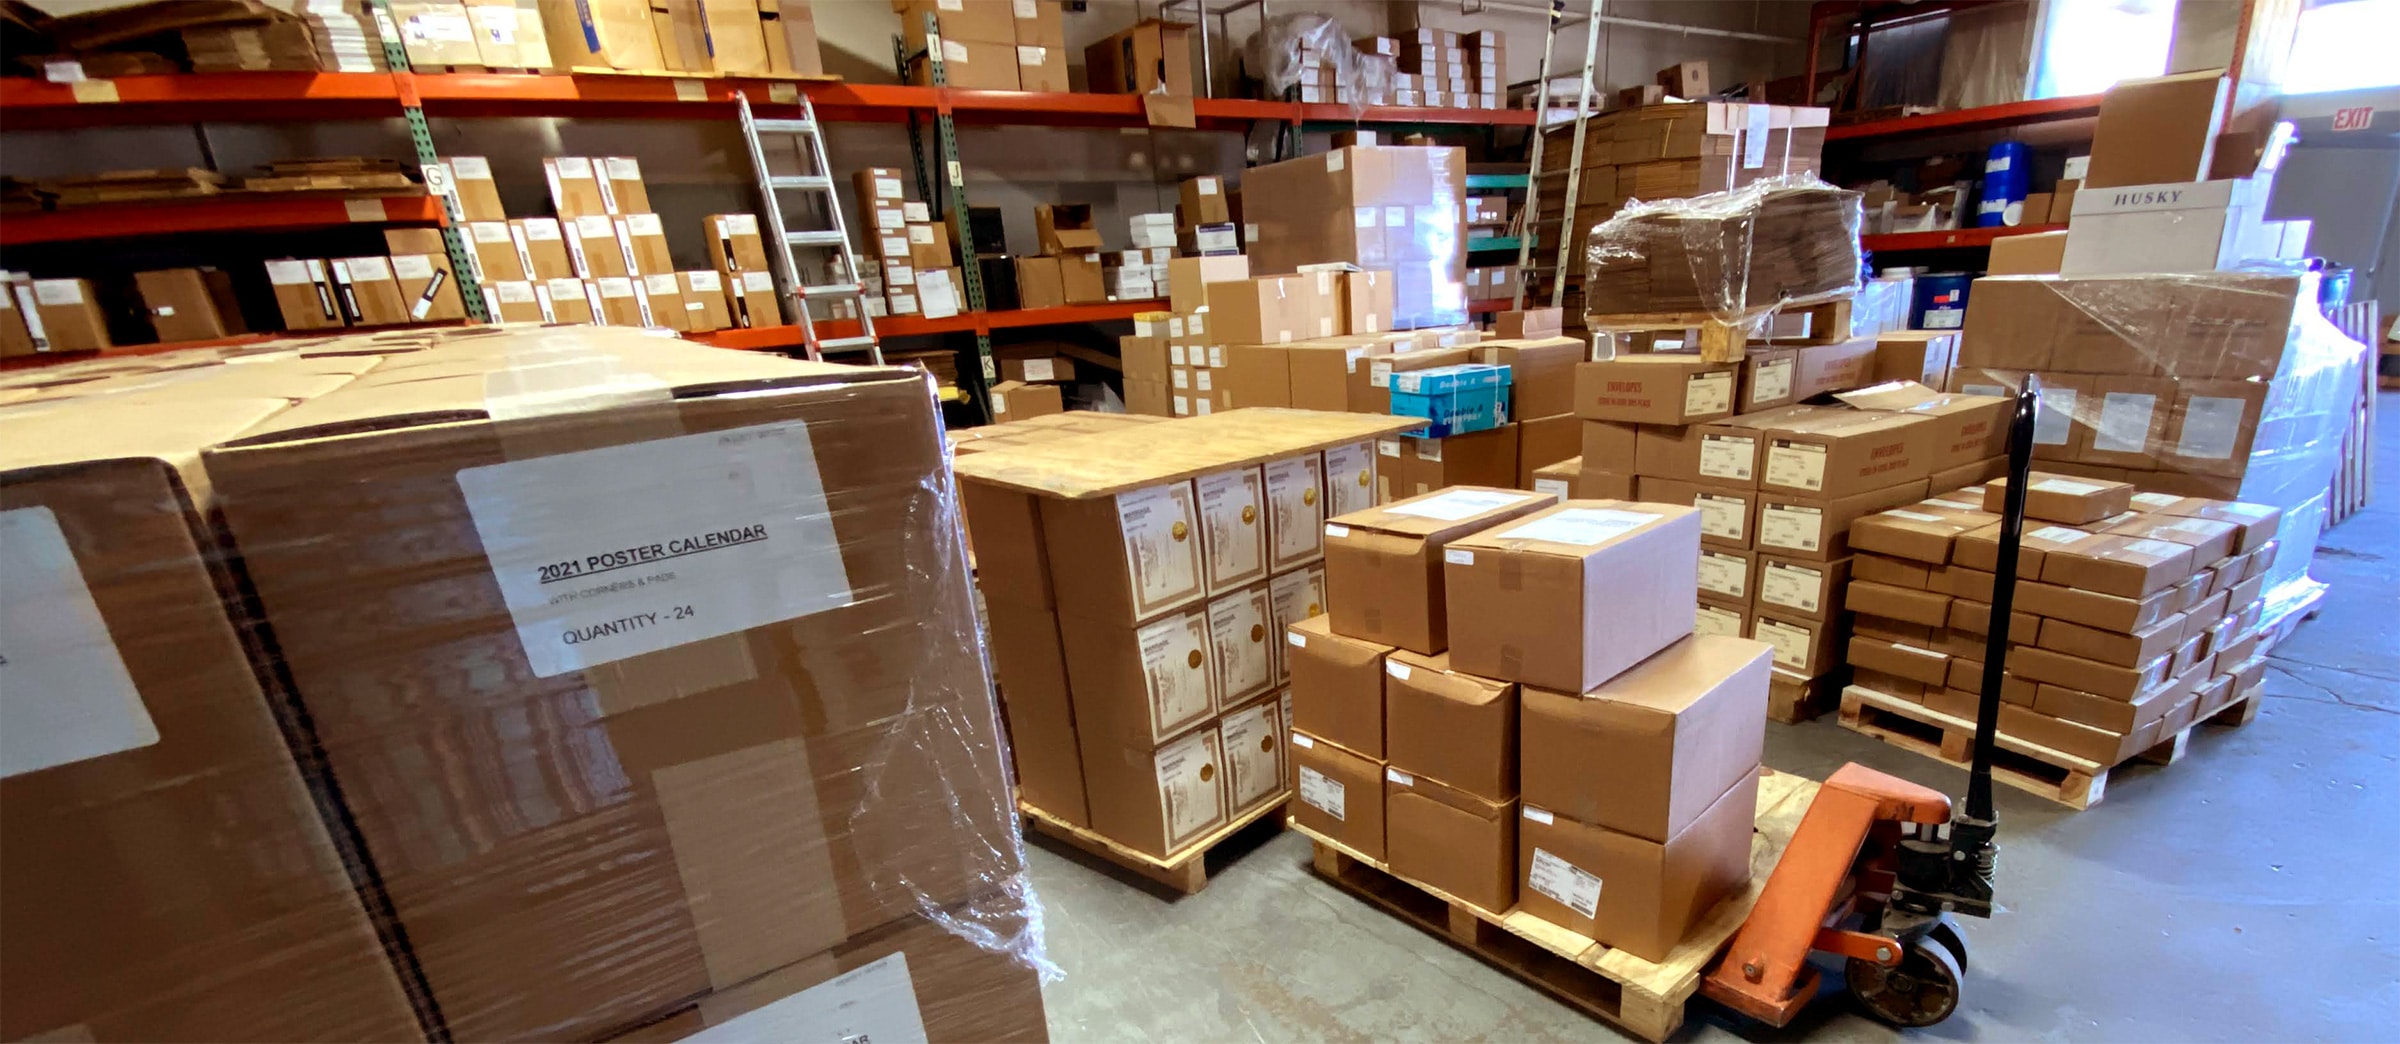 A high quality warehouse filled with boxes and pallets for printing purposes.